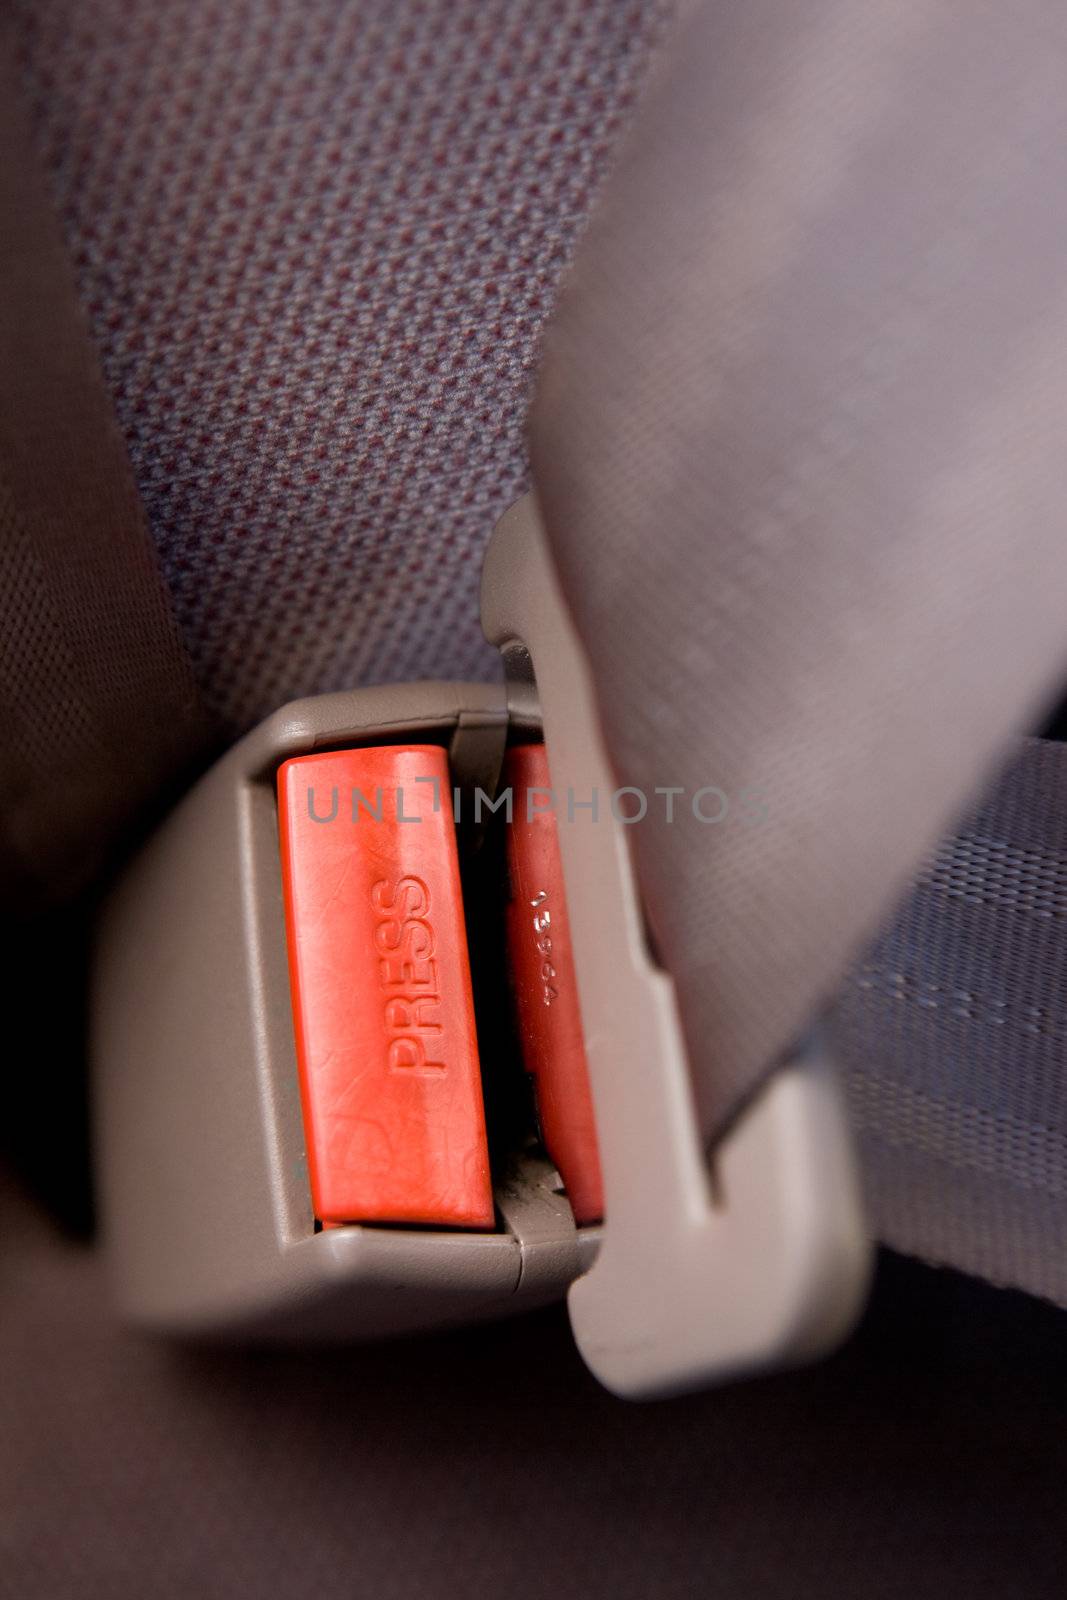 A seatbelt in a car with cloth seats